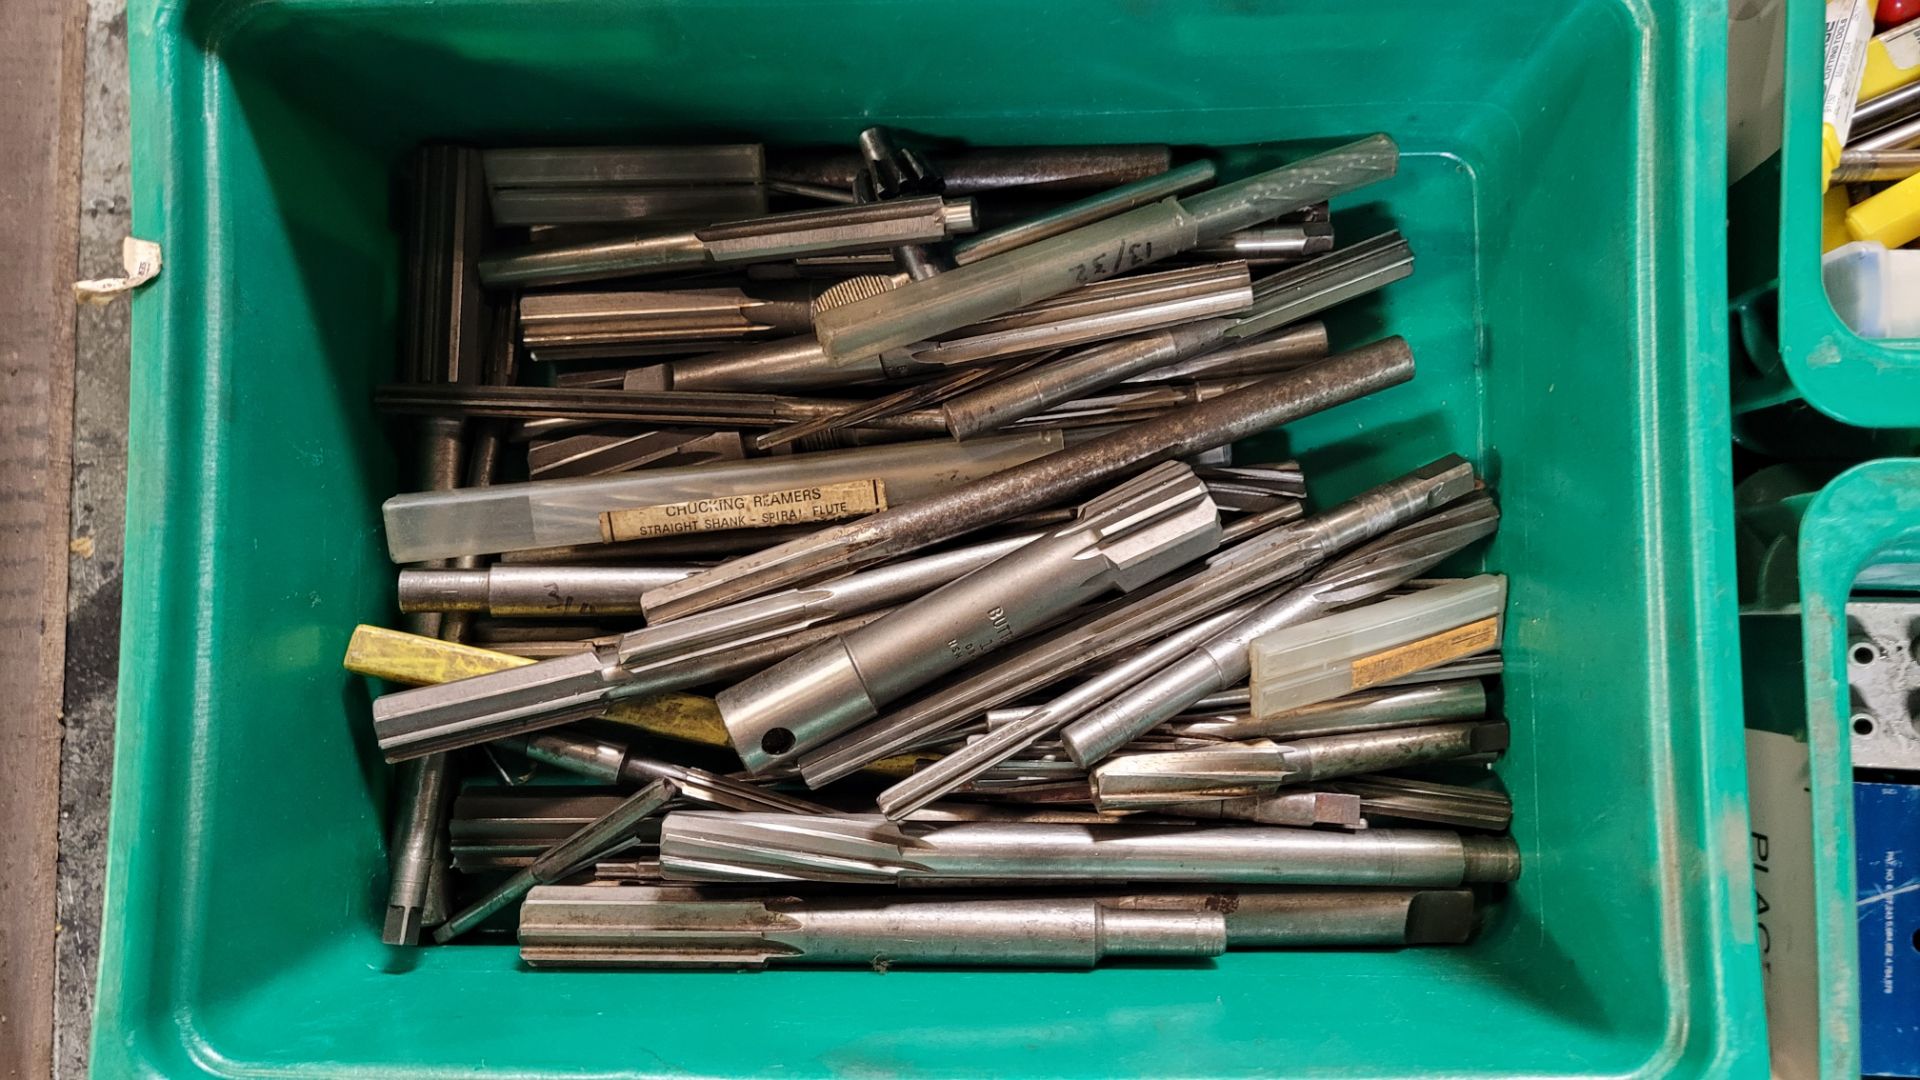 LOT OF ASST. CARBIDE CUTTING INSERTS, BORING BARS, CUTTING TOOLS, DRILL BITS, ETC. - Image 5 of 8